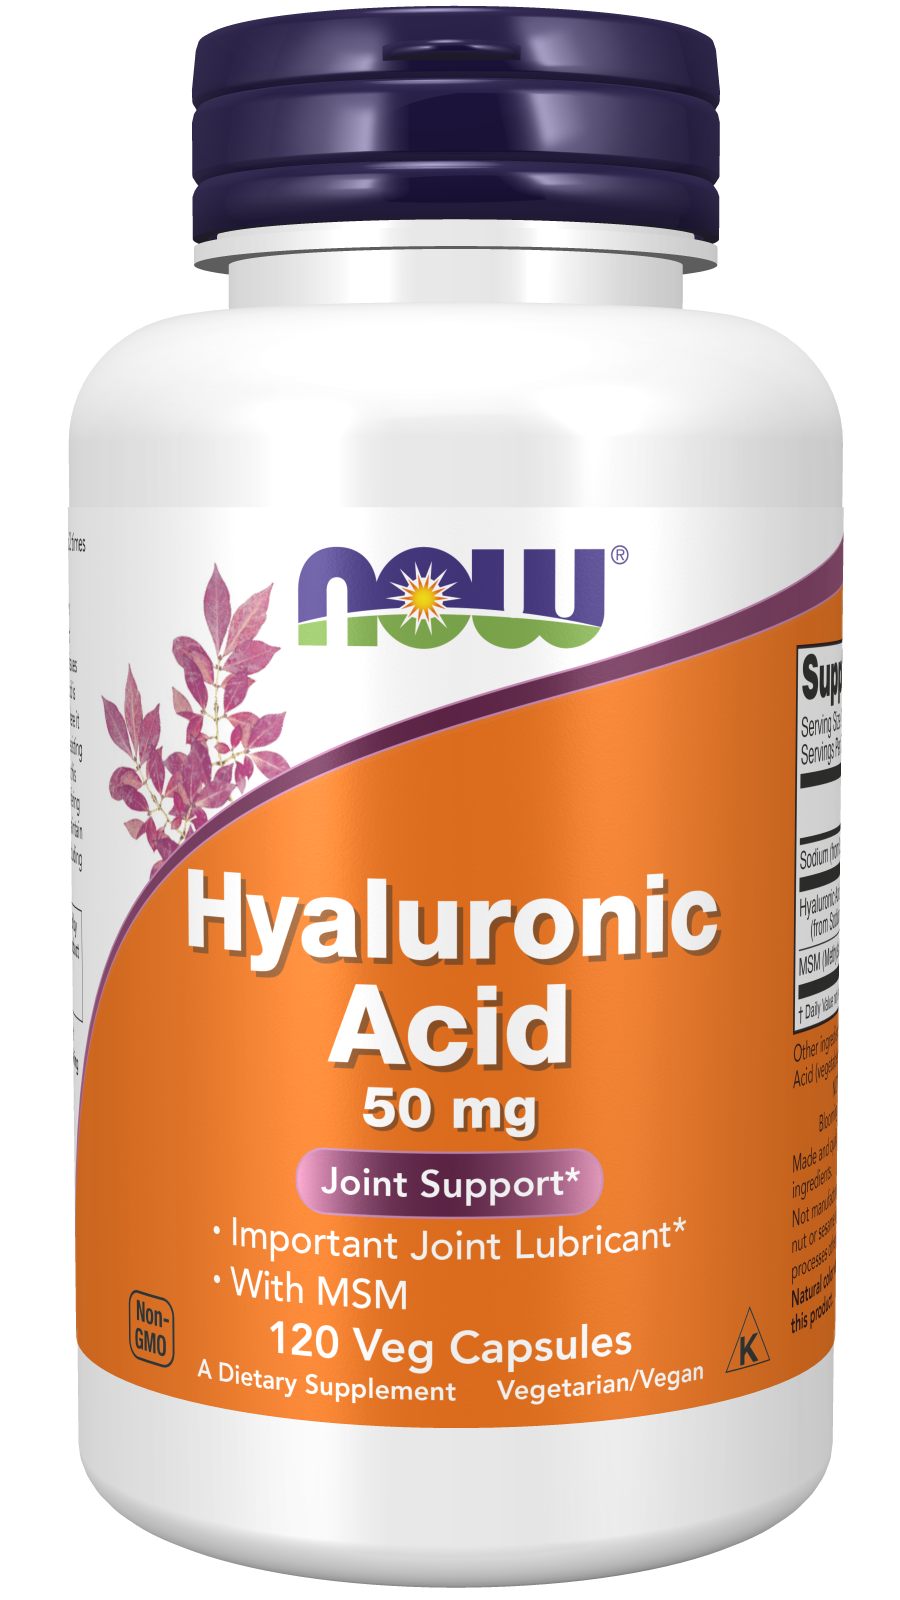 Hyaluronic Acid with MSM - 120 Veg Capsules Bottle Front